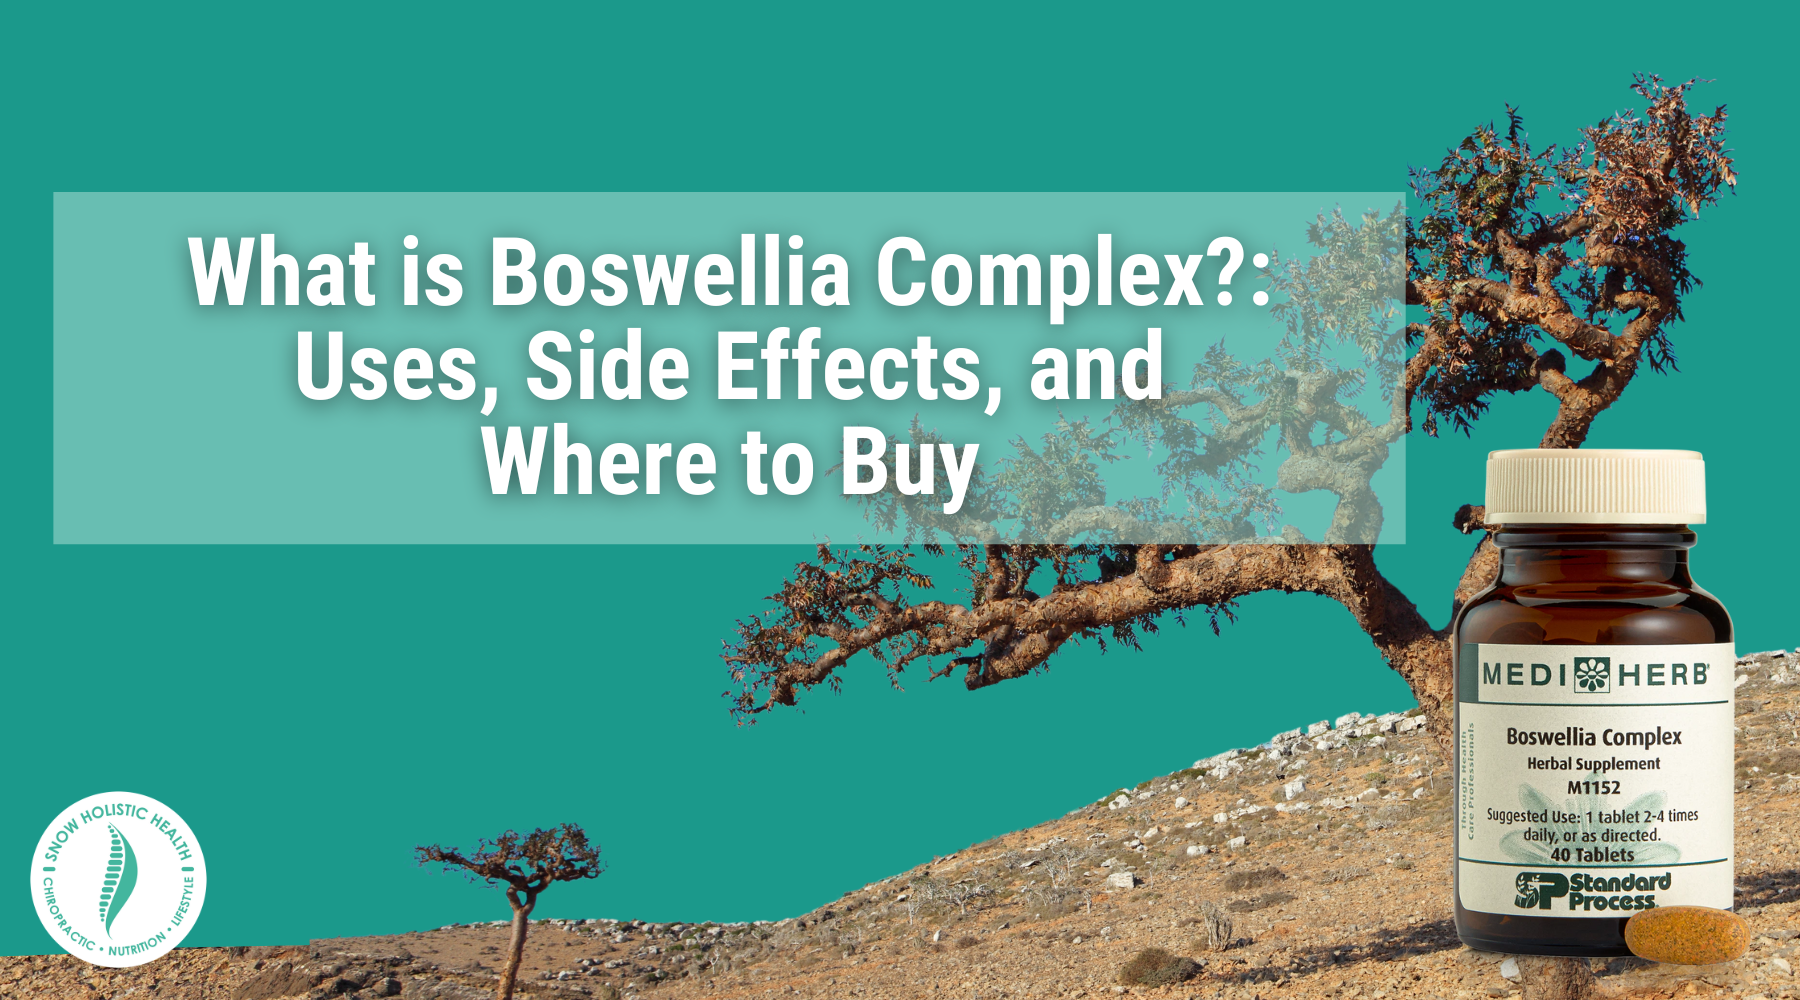 What is Boswellia Complex?: Uses, Side Effects, and Where to Buy